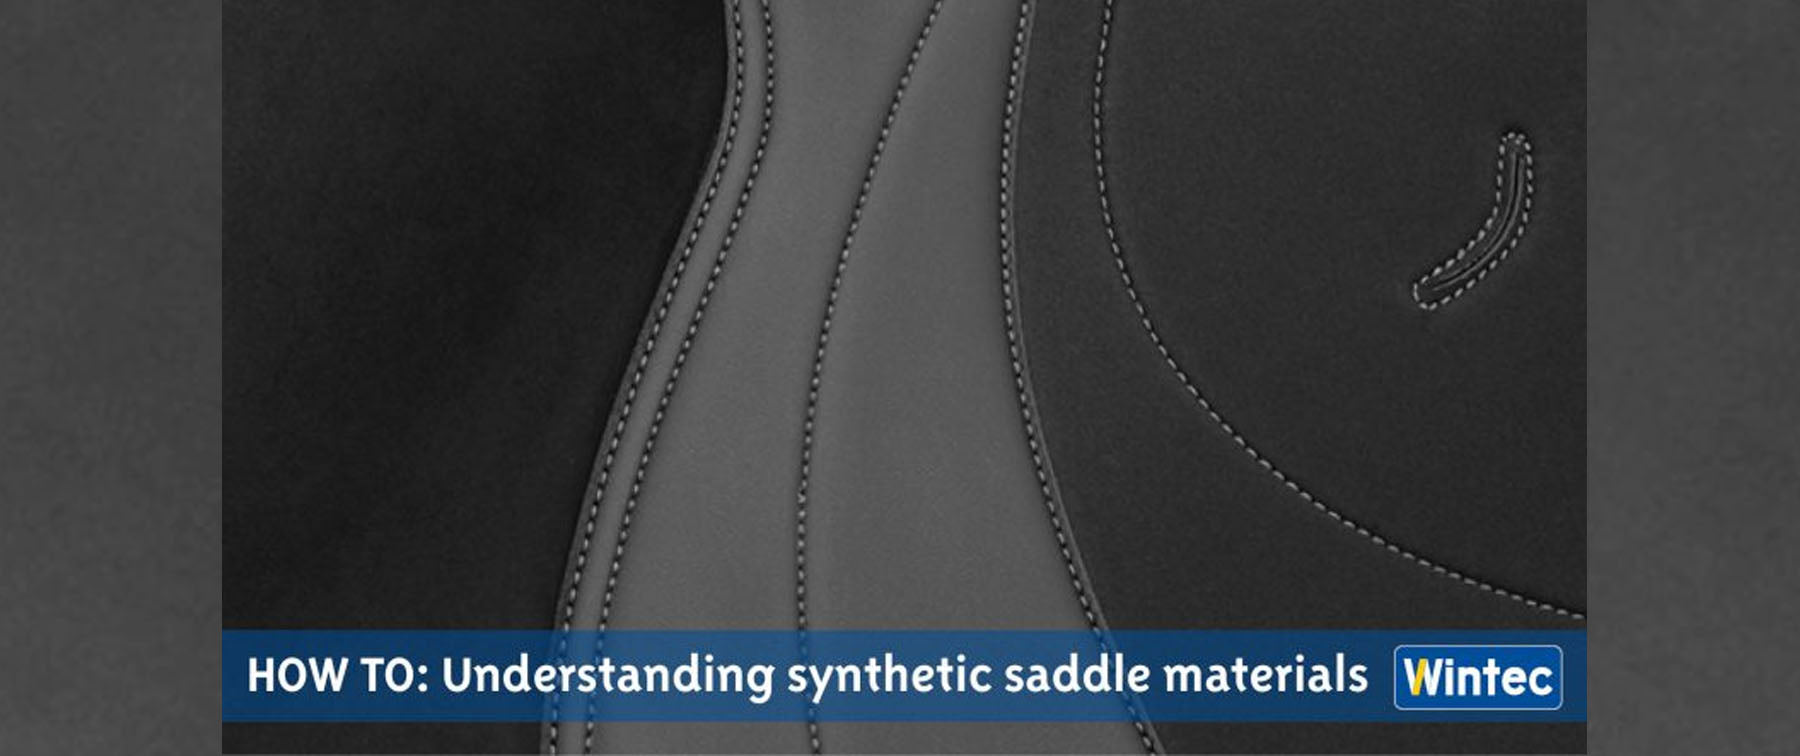 Wintec Guide's to Saddle Materials